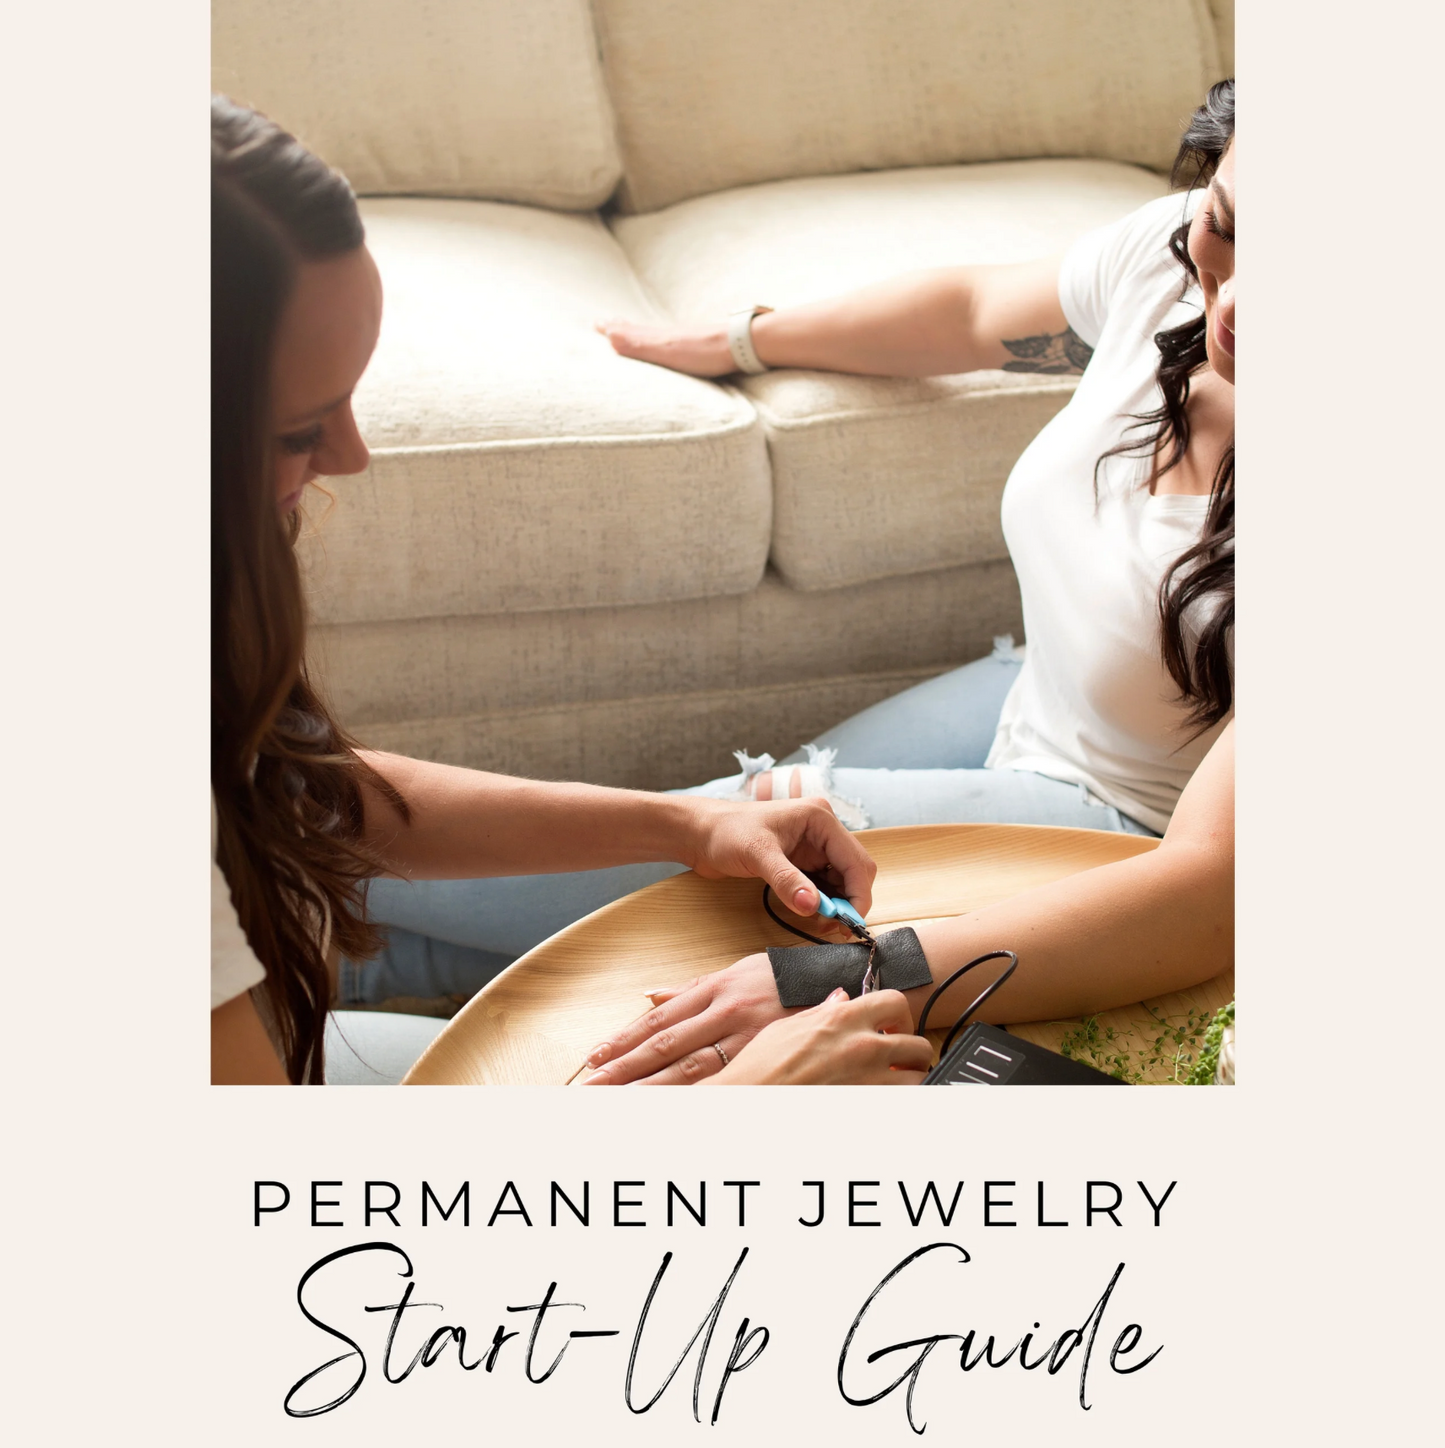 Permanent Jewelry Start-Up Guide